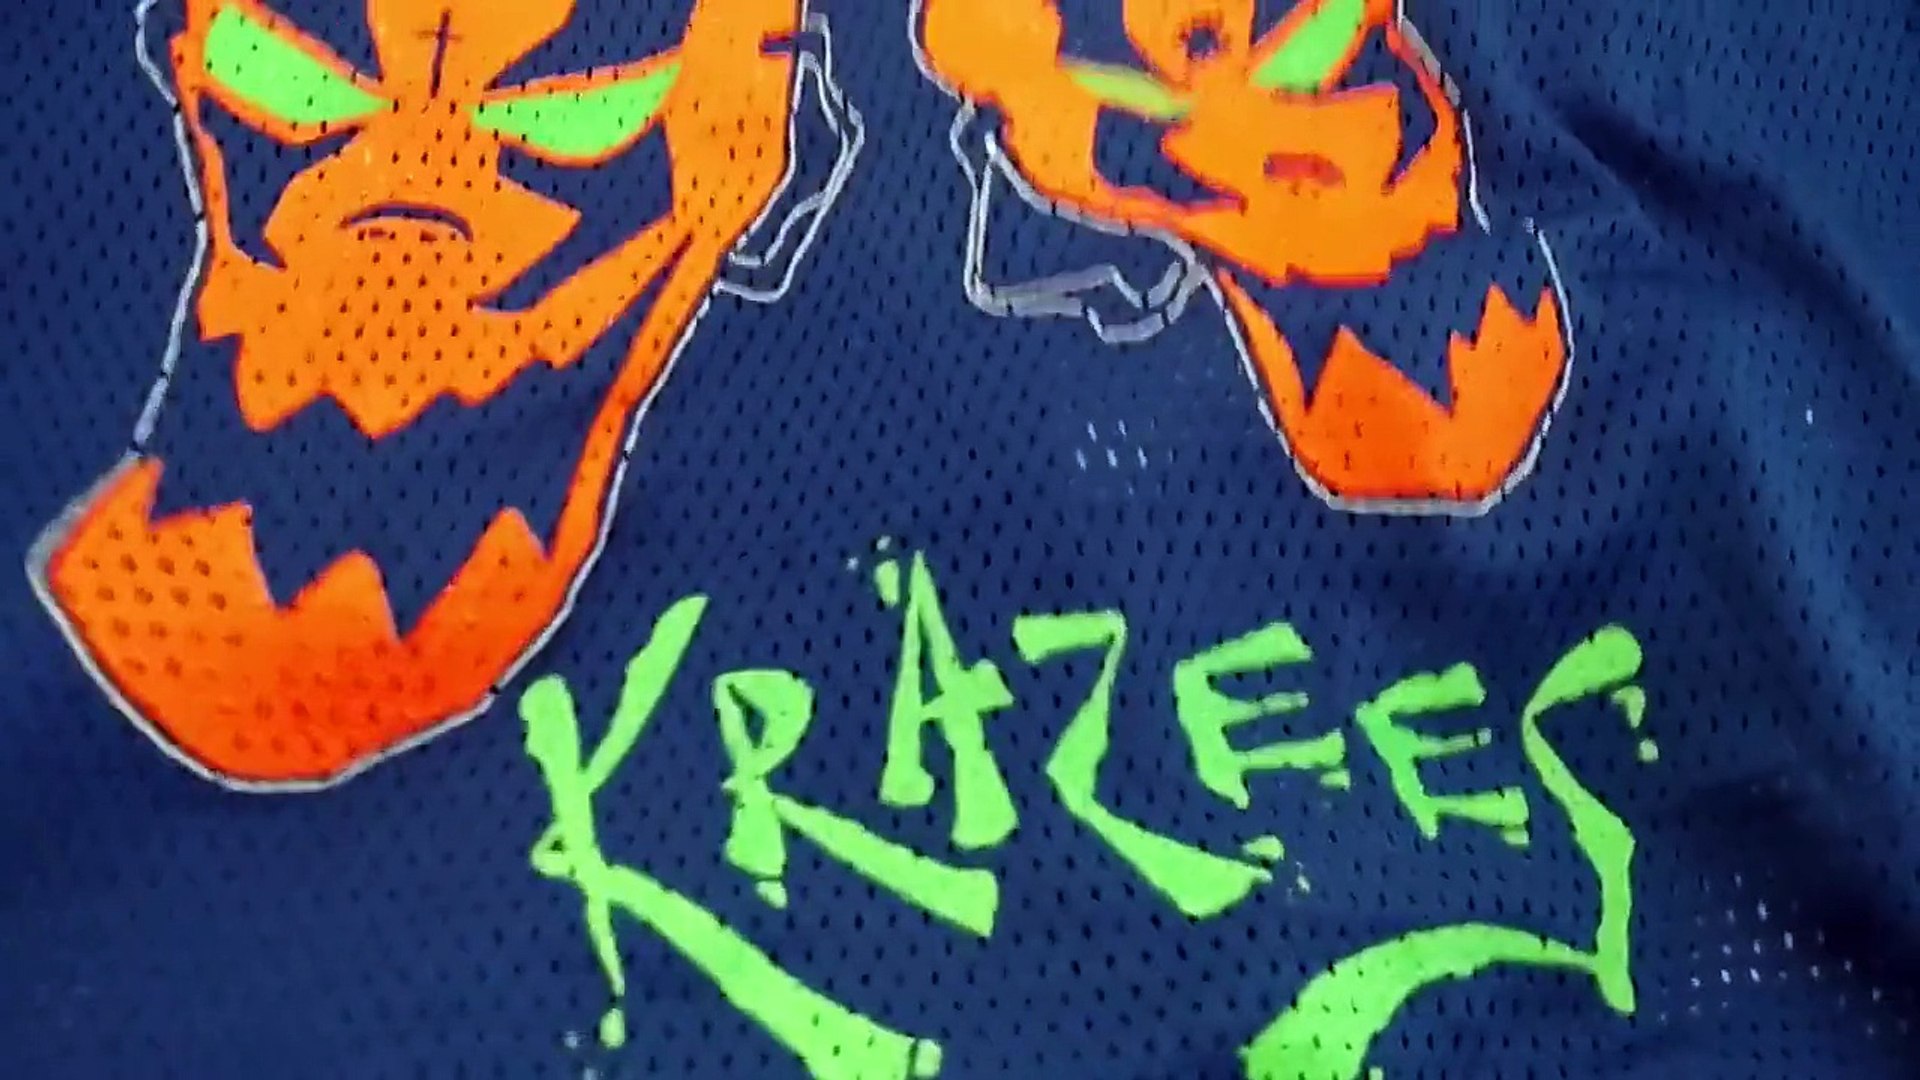 House of.  krazees   jersey   twiztid   icp  juggalo